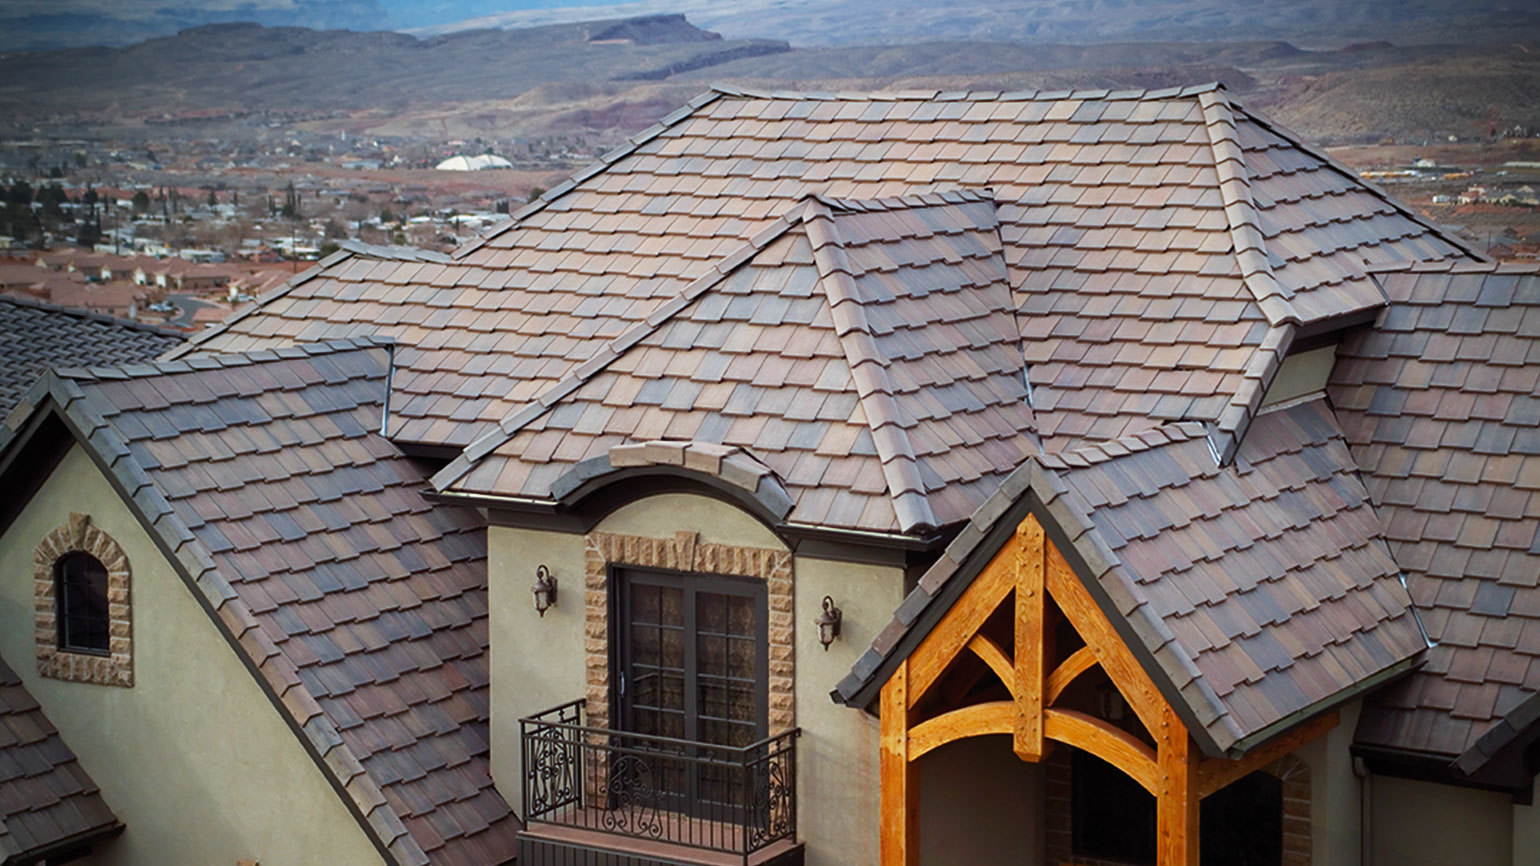 What are the worst ideas for protecting a roof?